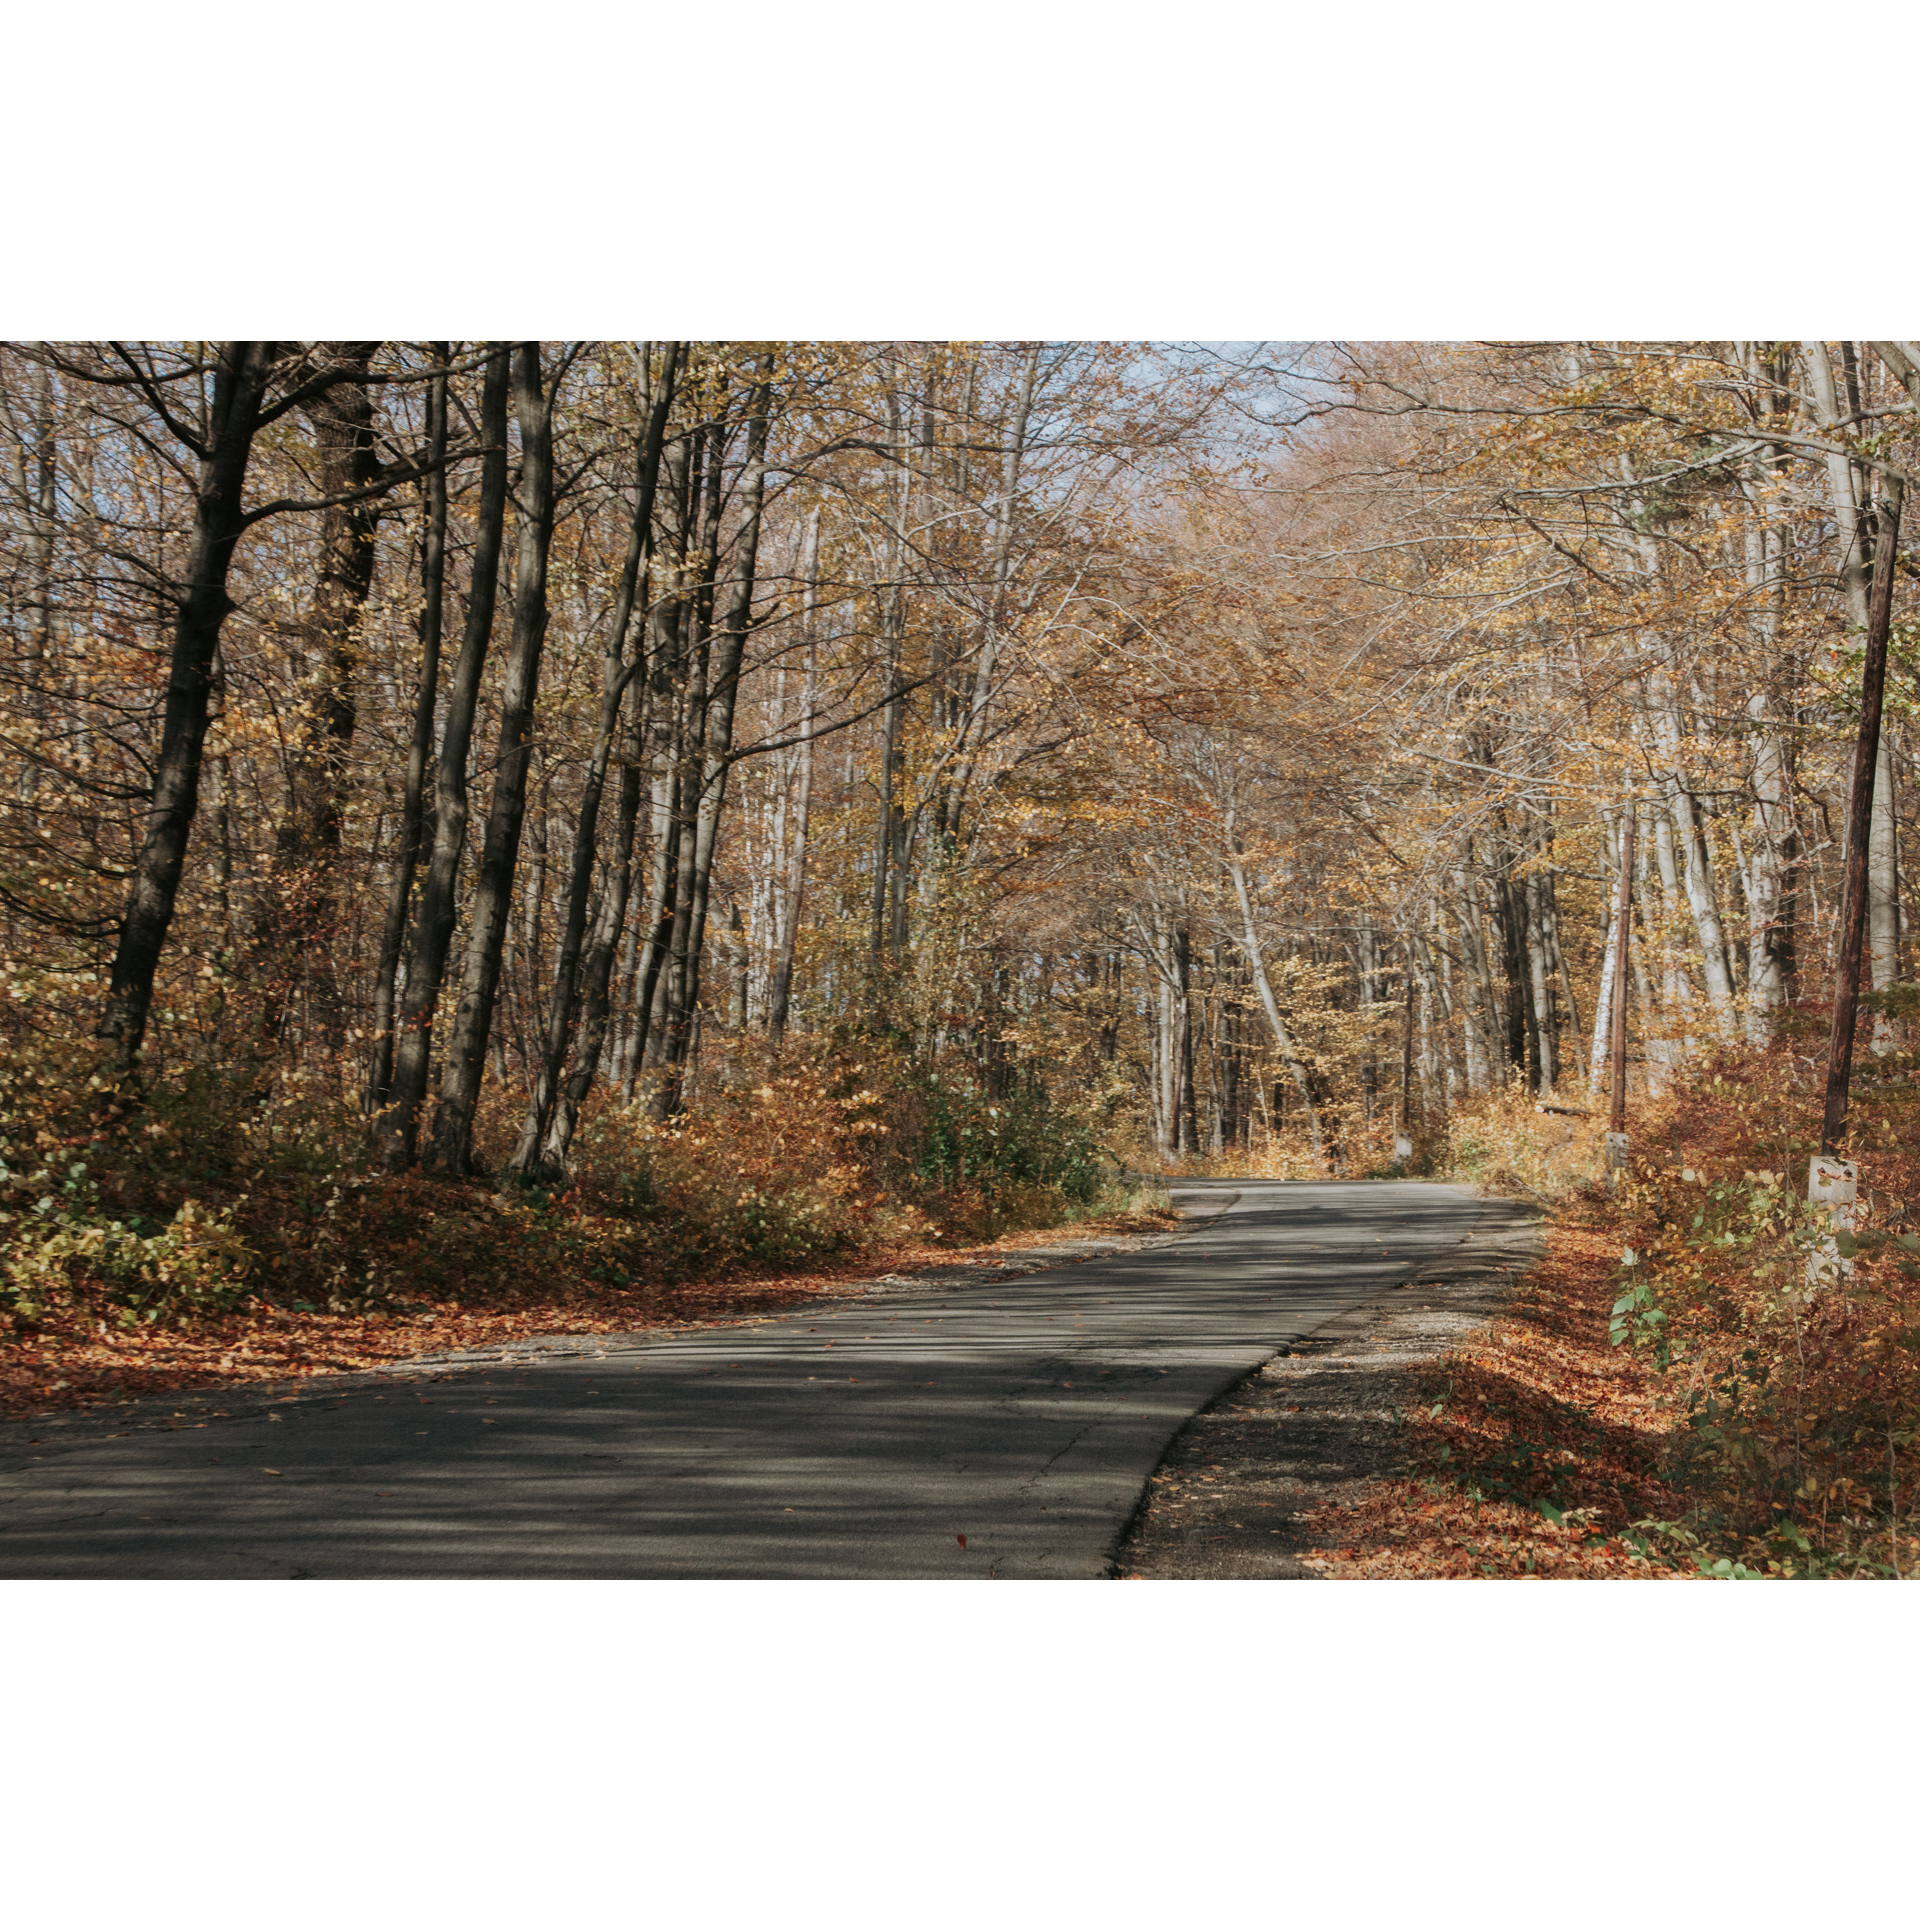 Forest asphalt road leading to the right among deciduous trees with brown leaves